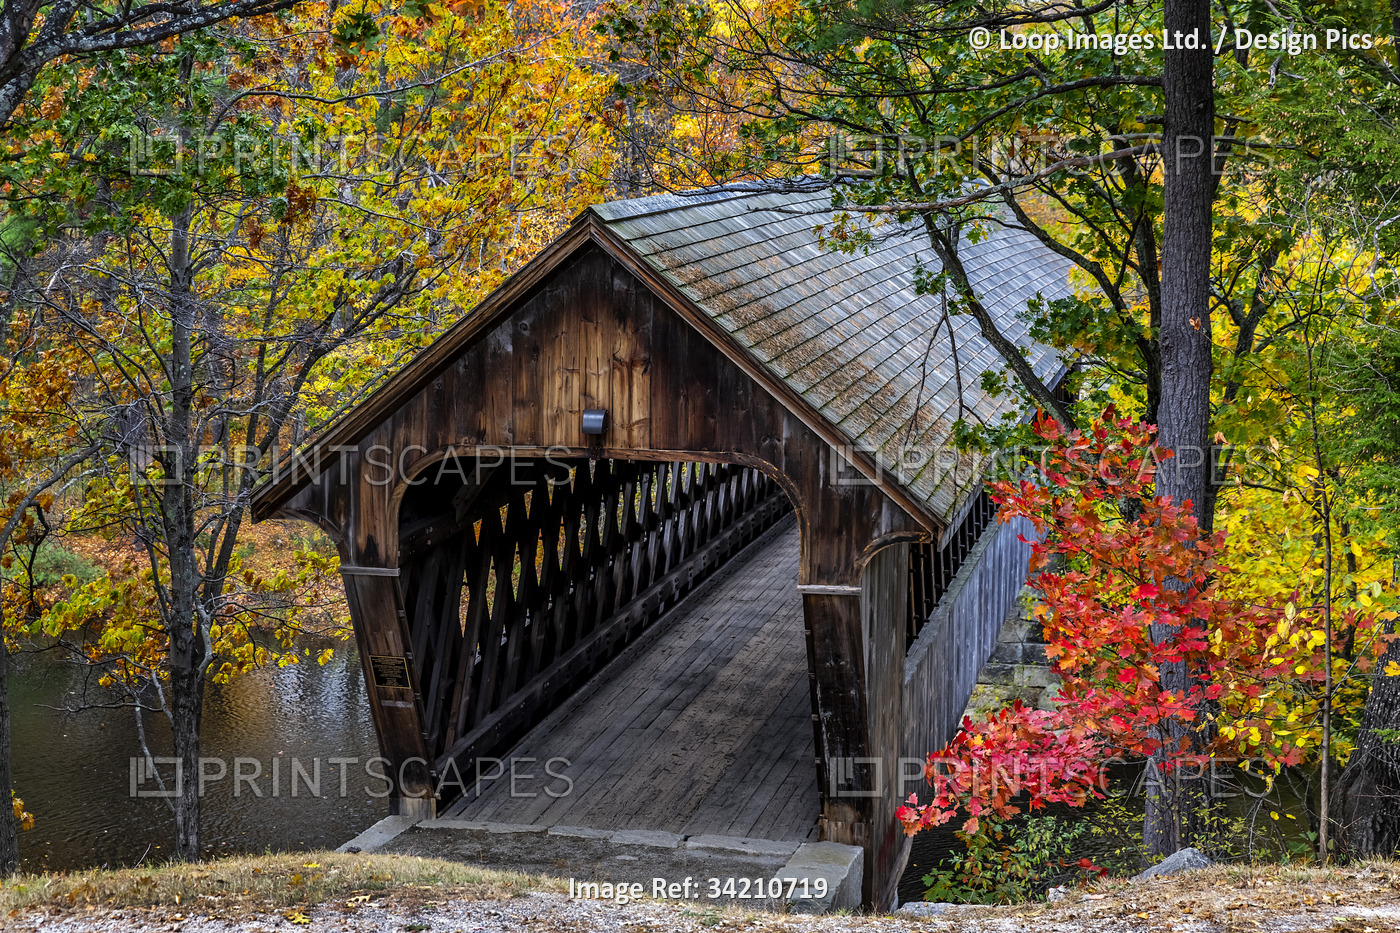 New England College Covered Bridge at Henniker in New Hampshire.